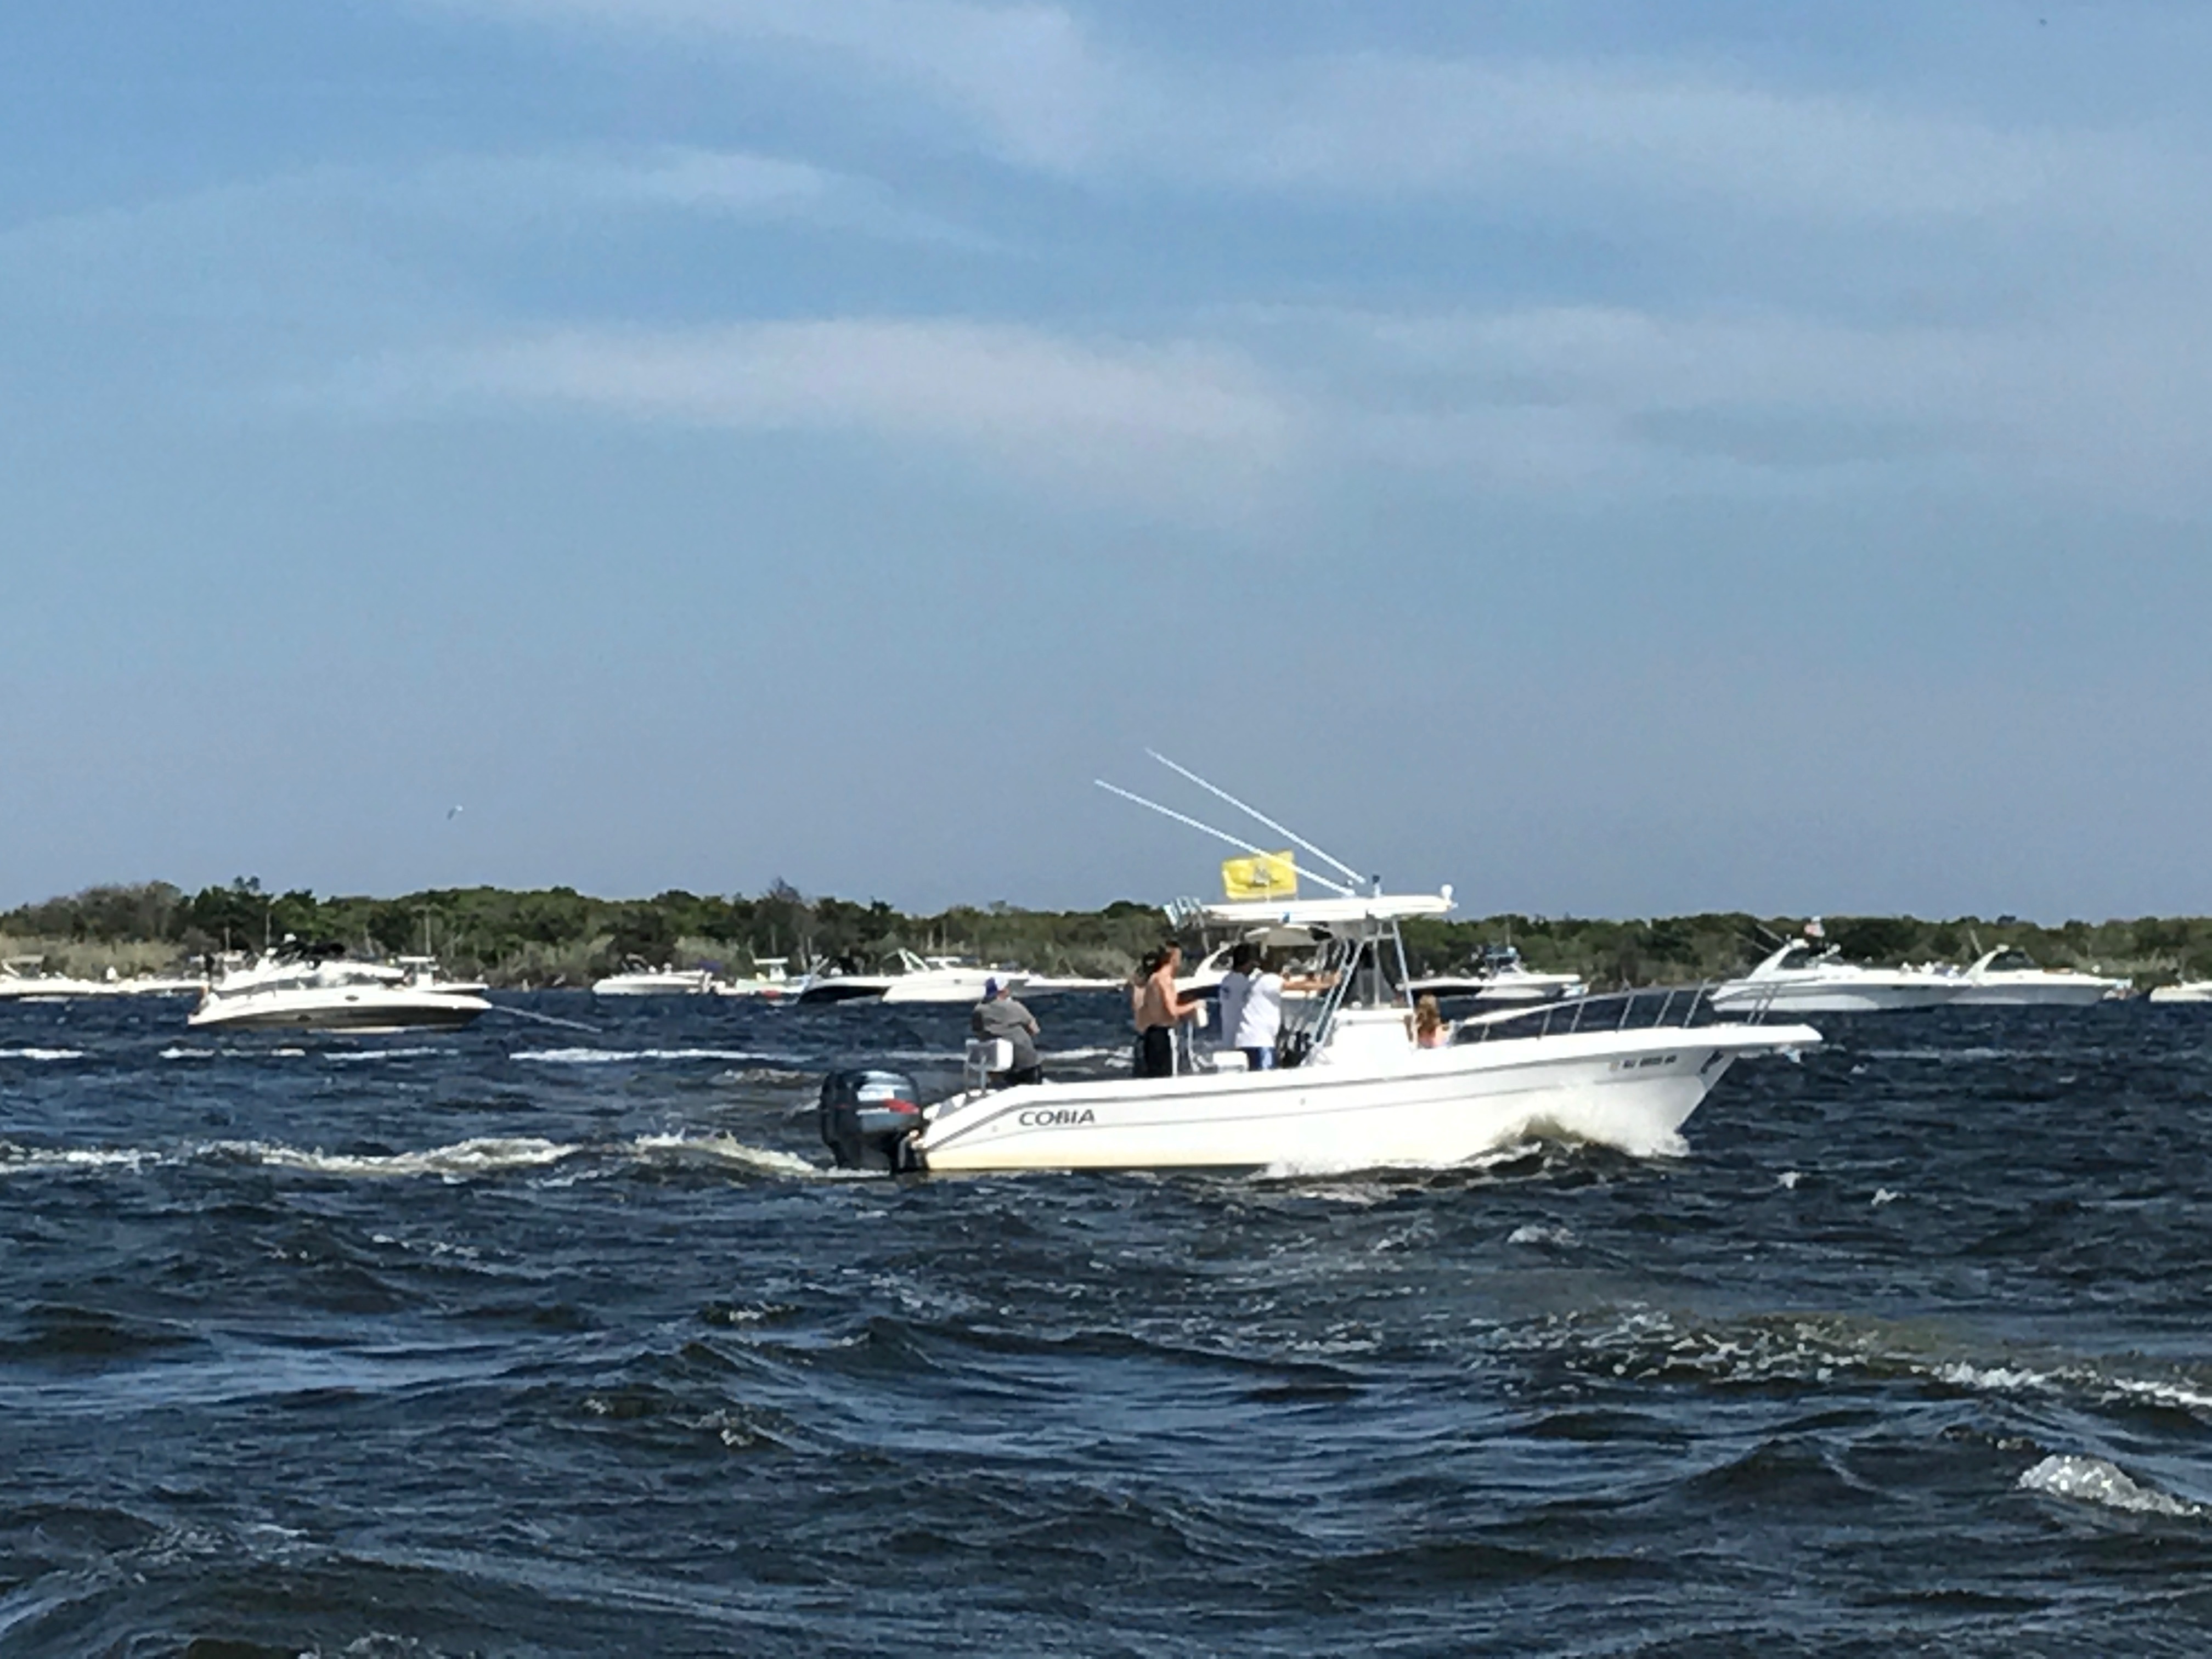 Boaters beating the heat at Tices Shoal, Sunday, June 11, 2017. (Photo: Daniel Nee)